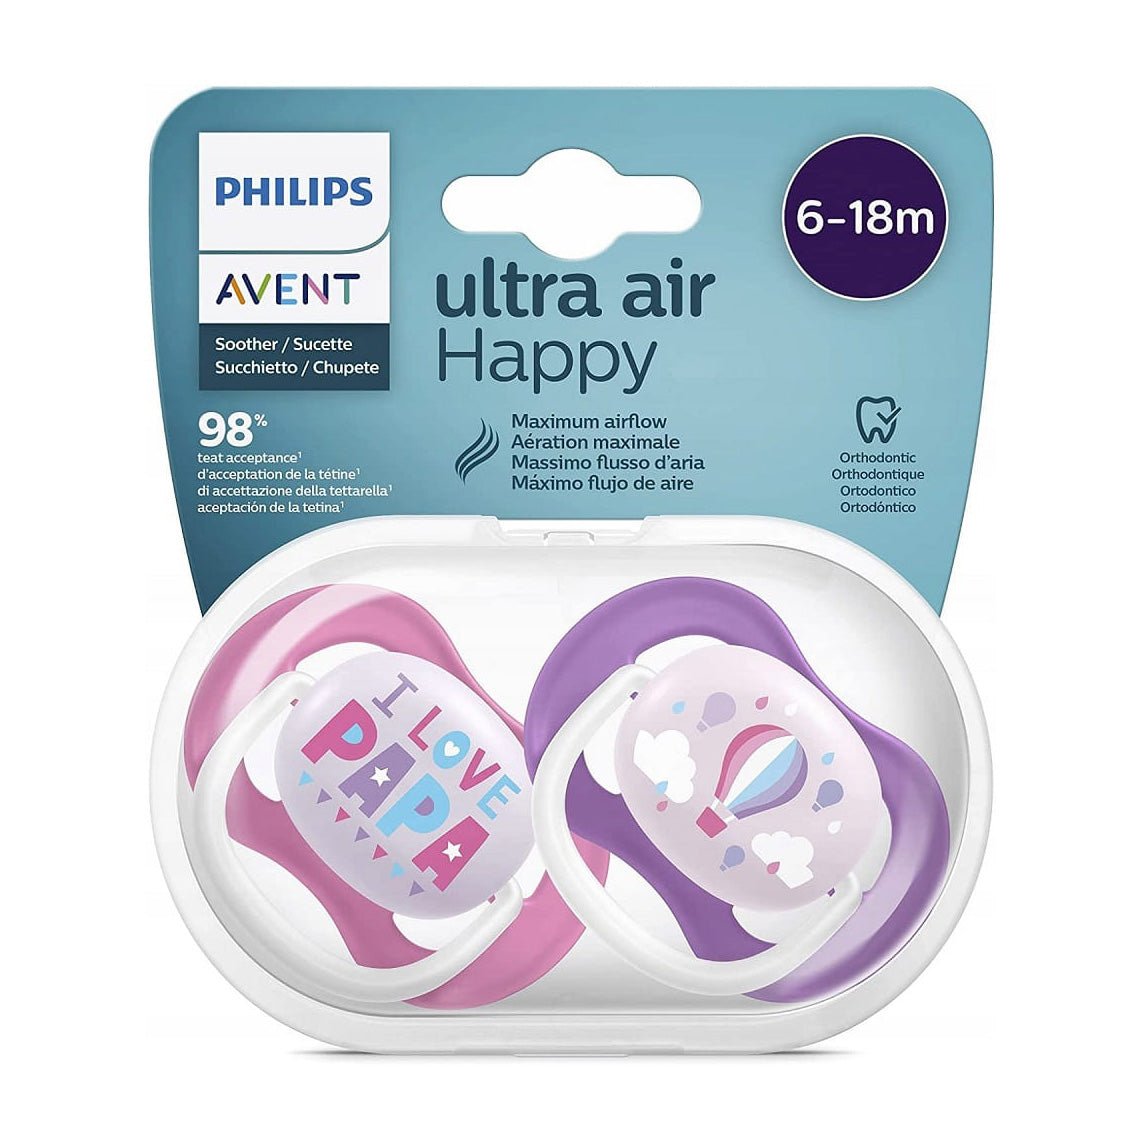 Avent Ultra Air Happy Pacifier 6-18m - Bloom Pharmacy